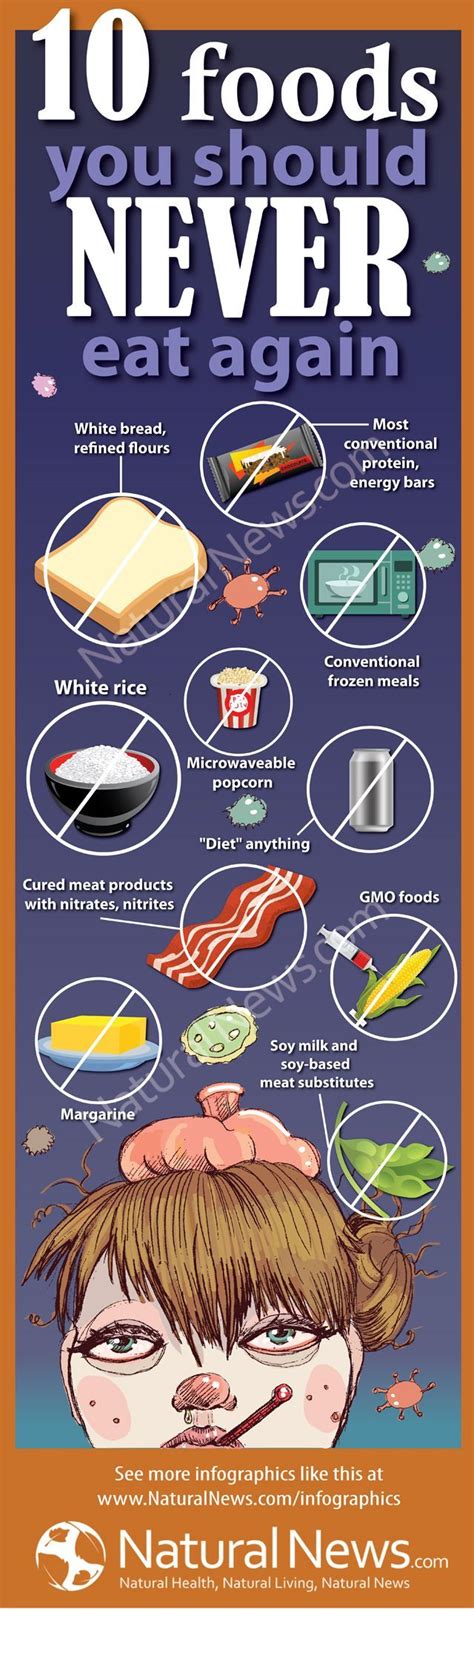 10 foods you should never eat again infographic